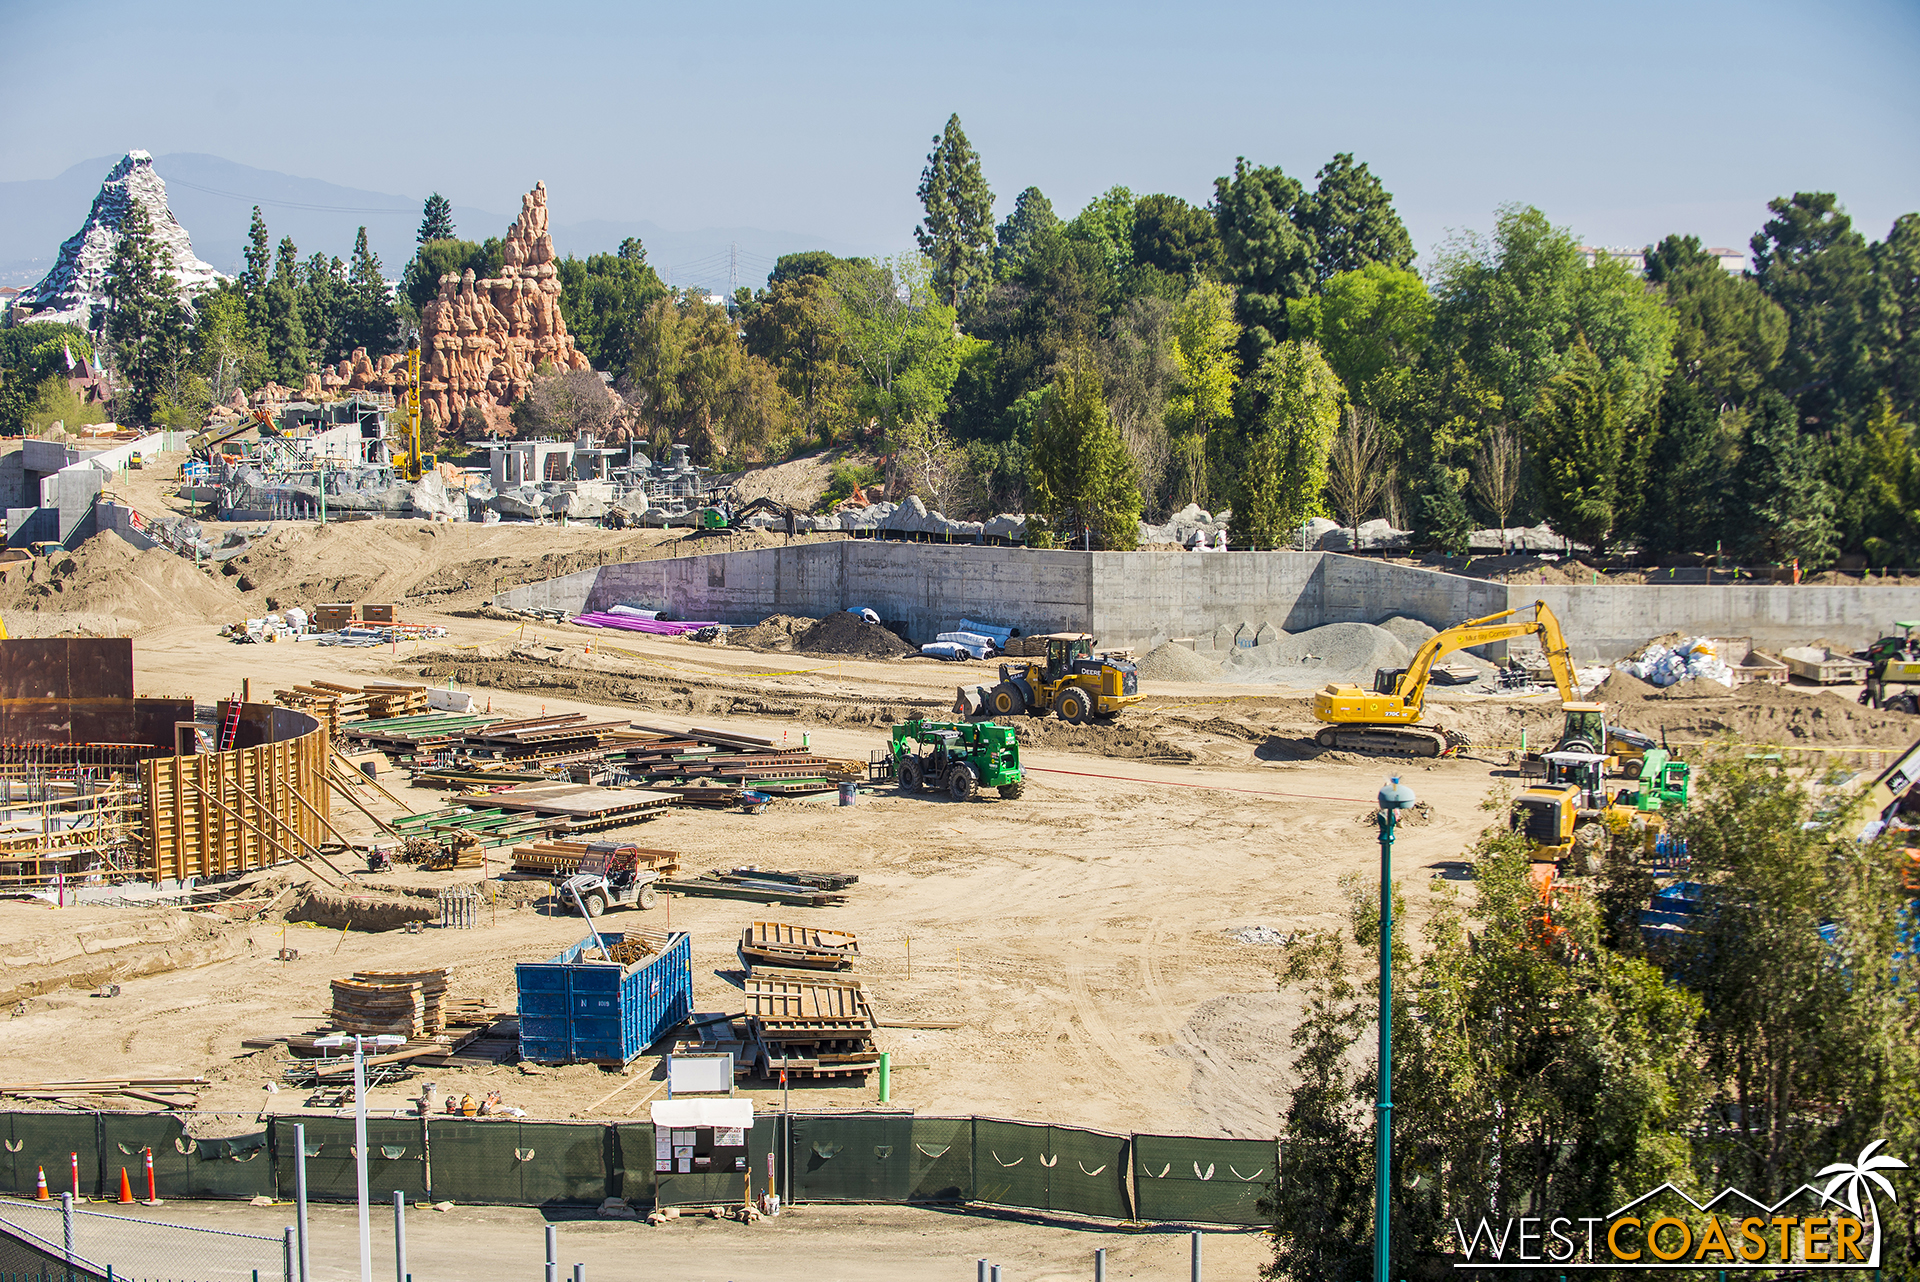  These leafy greens will provide plenty of fiber for the Rivers of America when they reopen this summer. 